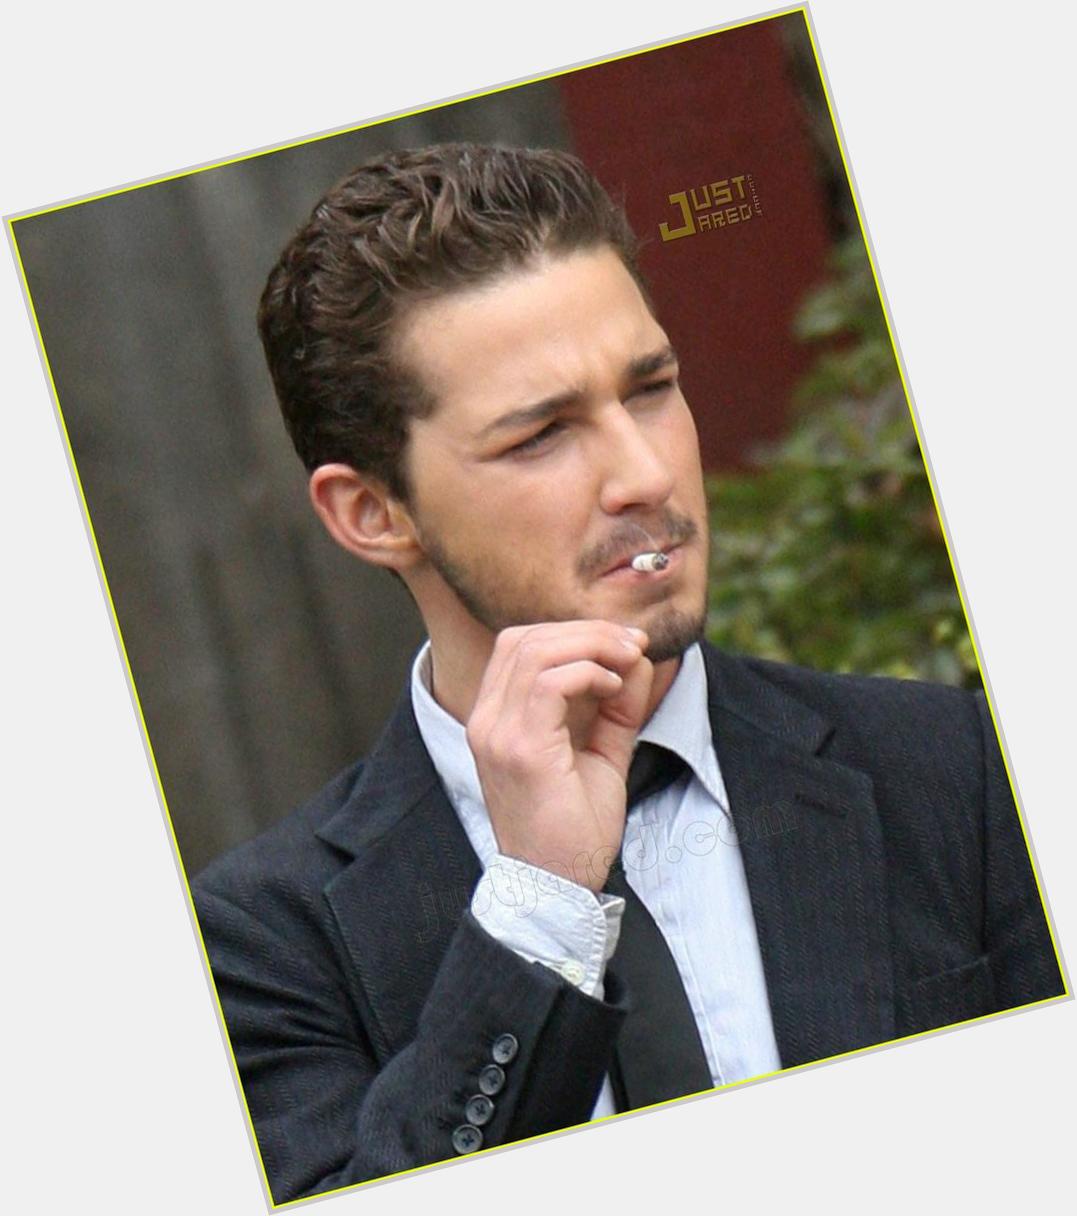   Happy birthday to my favorite actual cannibal, actual actor, and actual friend Shia LaBeouf  